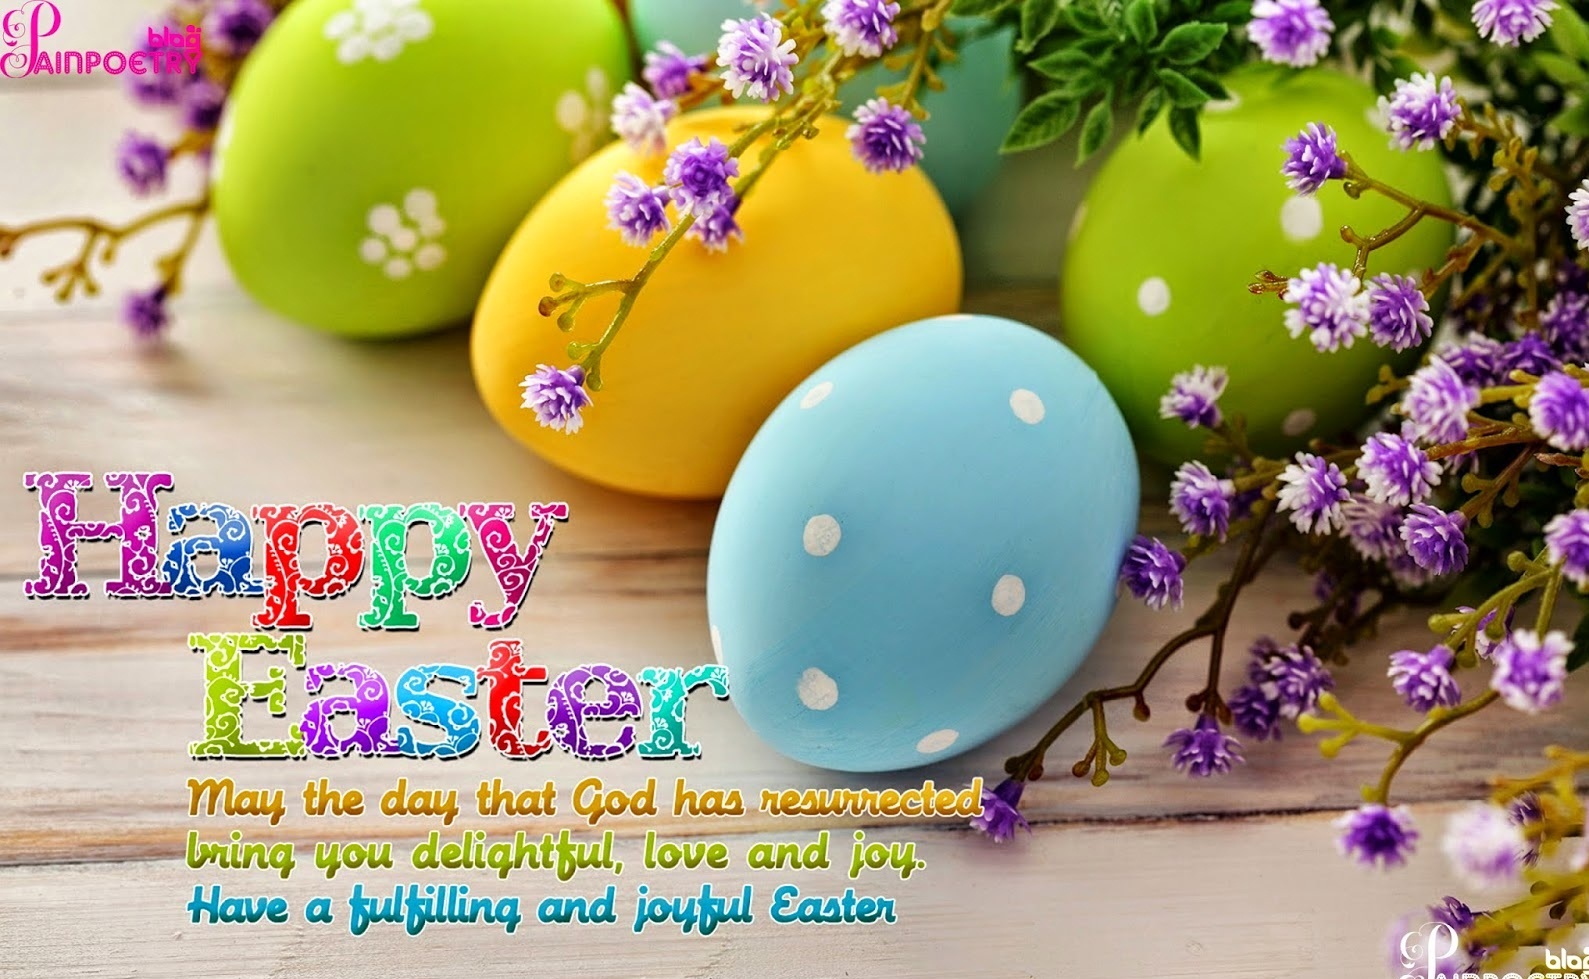 Happy Easter Images,Pictures,wallpapers,pics for facebook,whatsapp